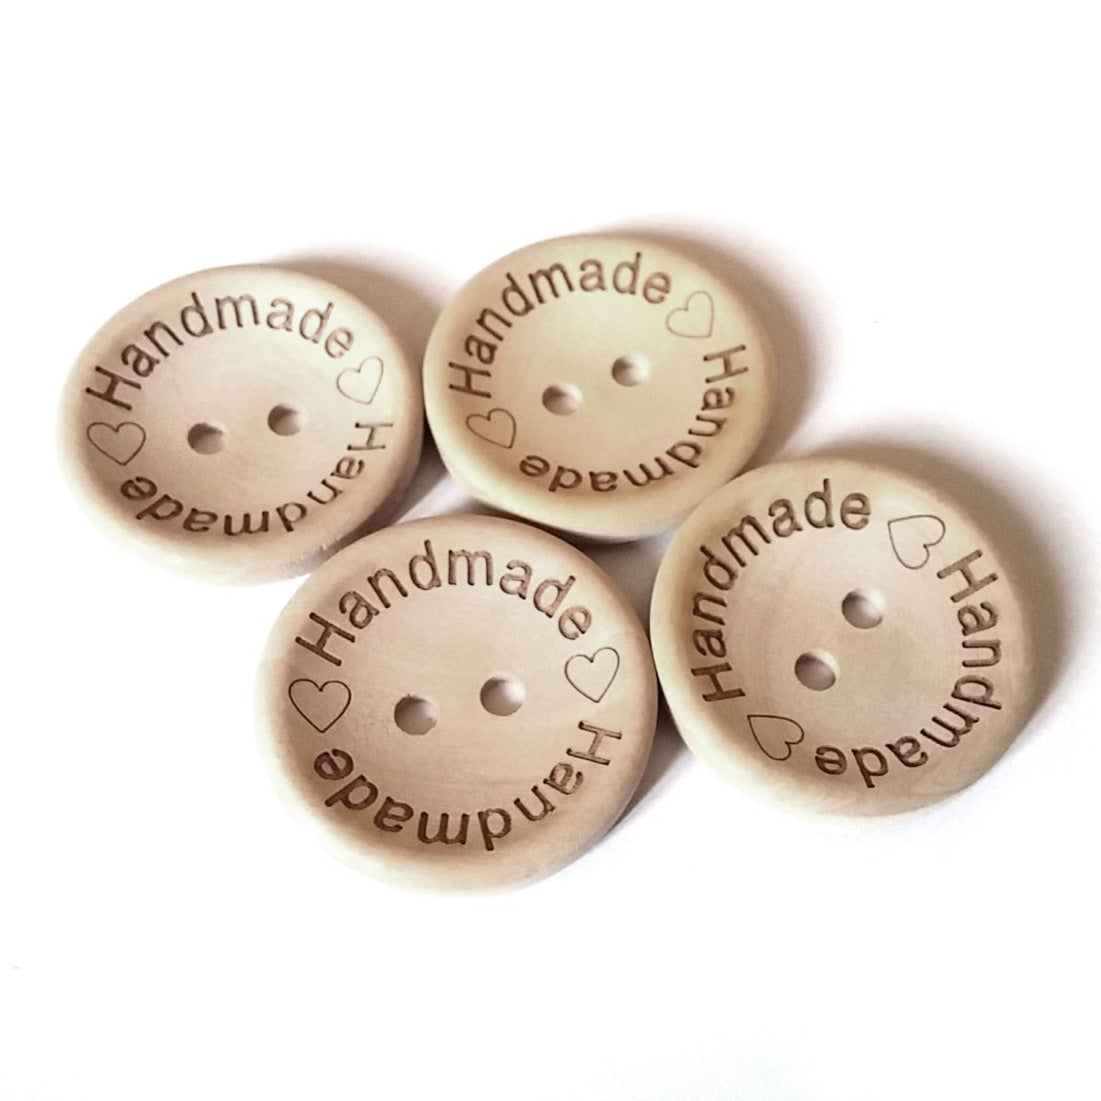 15mm wooden sewing buttons - 3 colors available